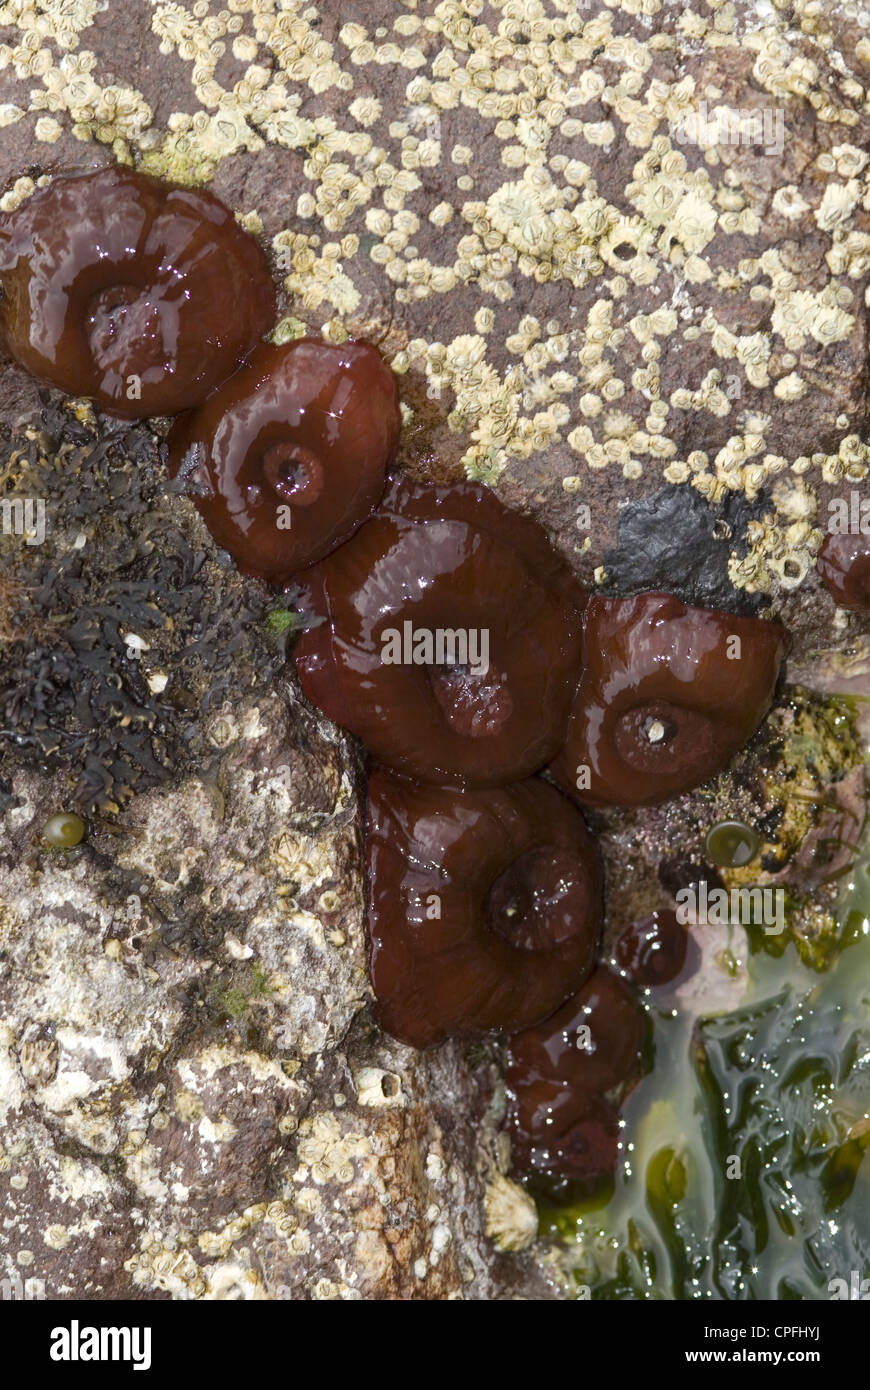 Beadlet Anemone (Actinia equina), 5 individuals exposed on the shore, St Abbs, Scotland, UK North Sea Stock Photo